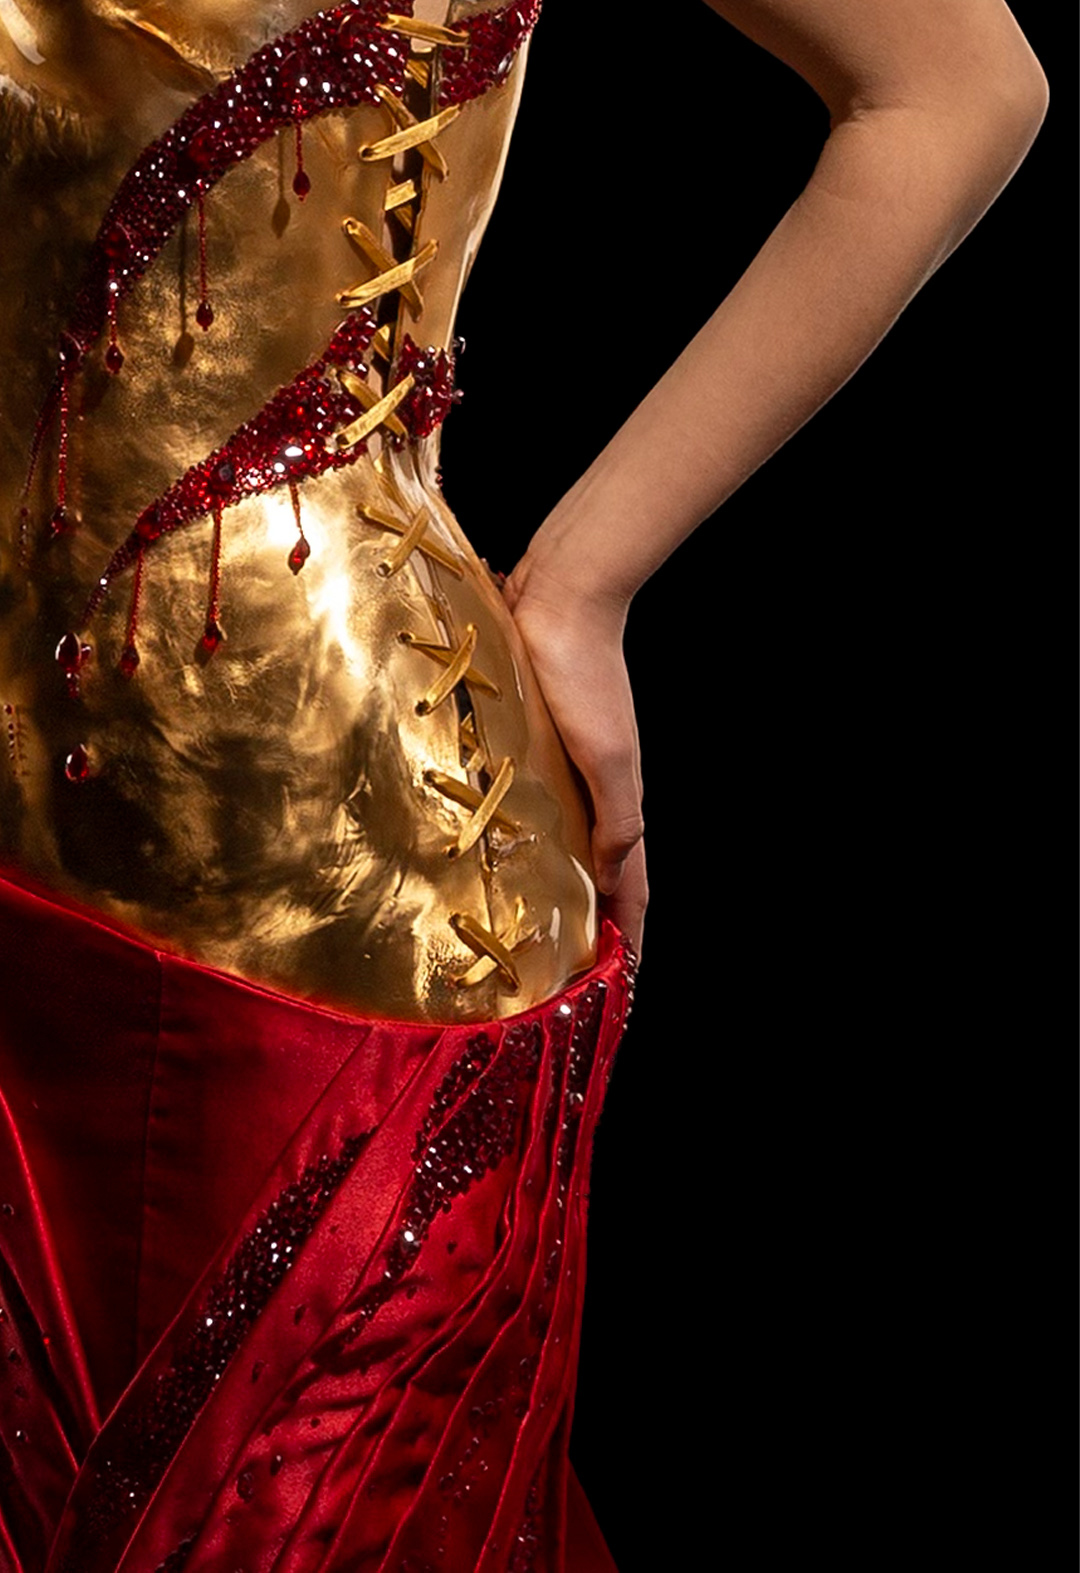 The left side view of the dress shows the imitation lace-up of the dress, with gold lace giving it a corset look. The scars from the front are carried to the back. The pleated skirt continues the dripping-blood effect with rhinestone details.